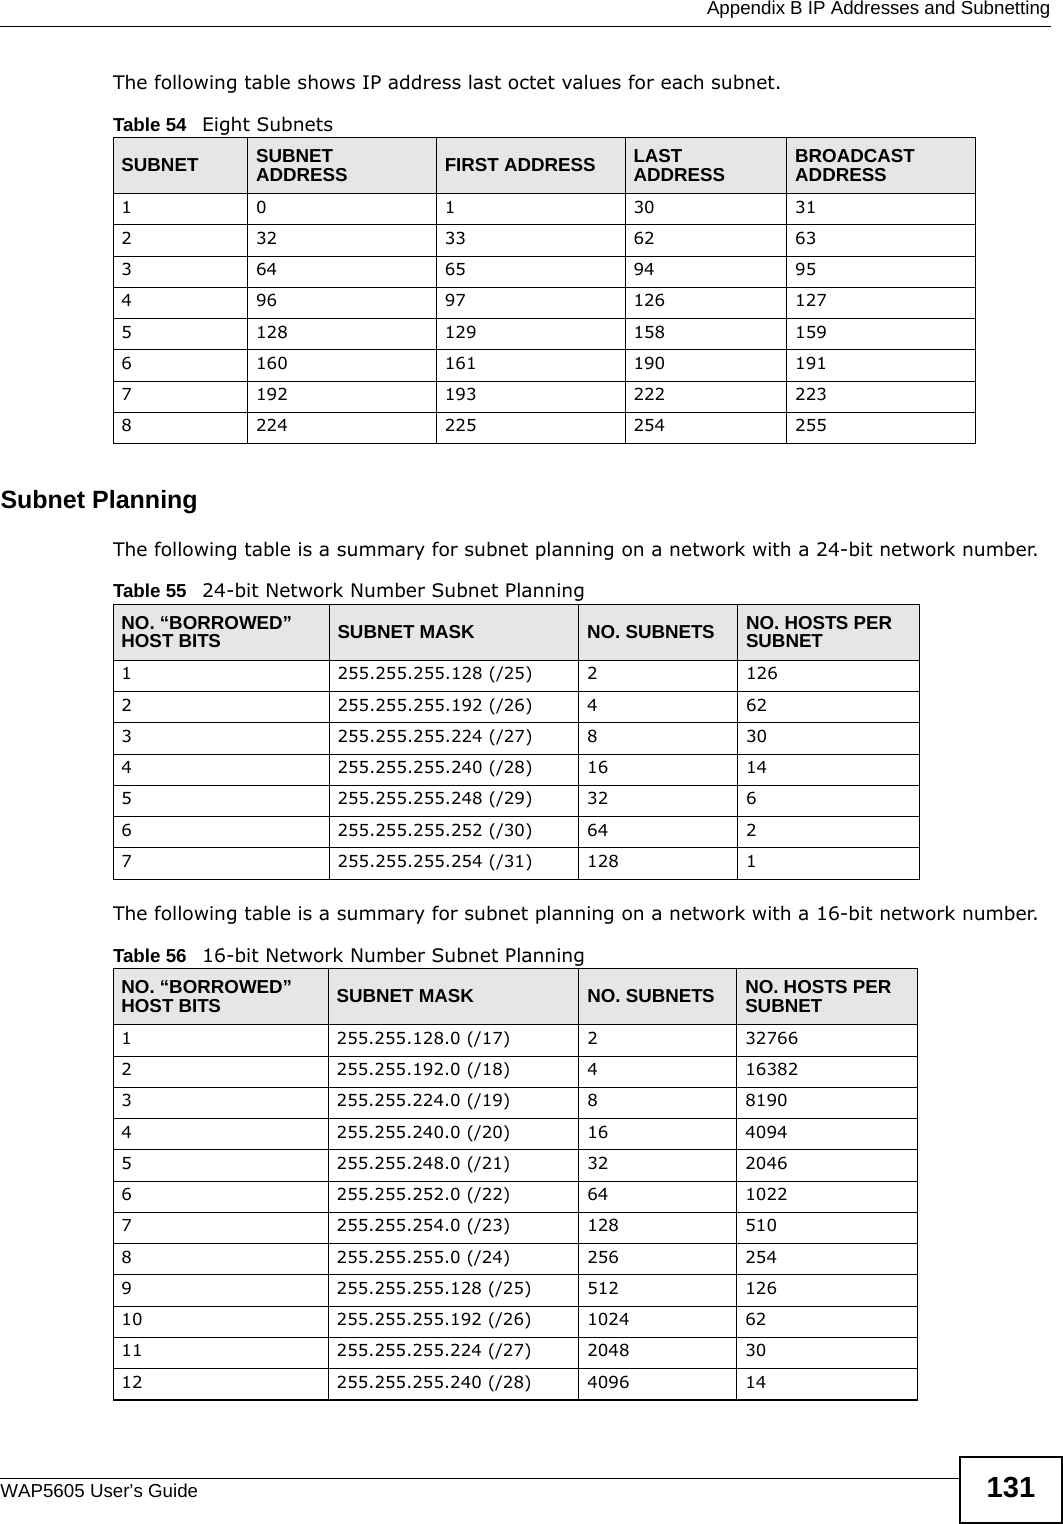  Appendix B IP Addresses and SubnettingWAP5605 User’s Guide 131The following table shows IP address last octet values for each subnet.Subnet PlanningThe following table is a summary for subnet planning on a network with a 24-bit network number.The following table is a summary for subnet planning on a network with a 16-bit network number. Table 54   Eight SubnetsSUBNET SUBNET ADDRESS FIRST ADDRESS LAST ADDRESS BROADCAST ADDRESS1 0 1 30 31232 33 62 63364 65 94 95496 97 126 1275128 129 158 1596160 161 190 1917192 193 222 2238224 225 254 255Table 55   24-bit Network Number Subnet PlanningNO. “BORROWED” HOST BITS SUBNET MASK NO. SUBNETS NO. HOSTS PER SUBNET1255.255.255.128 (/25) 21262255.255.255.192 (/26) 4623255.255.255.224 (/27) 8304255.255.255.240 (/28) 16 145255.255.255.248 (/29) 32 66255.255.255.252 (/30) 64 27255.255.255.254 (/31) 128 1Table 56   16-bit Network Number Subnet PlanningNO. “BORROWED” HOST BITS SUBNET MASK NO. SUBNETS NO. HOSTS PER SUBNET1255.255.128.0 (/17) 2327662255.255.192.0 (/18) 4163823255.255.224.0 (/19) 881904255.255.240.0 (/20) 16 40945255.255.248.0 (/21) 32 20466255.255.252.0 (/22) 64 10227255.255.254.0 (/23) 128 5108255.255.255.0 (/24) 256 2549255.255.255.128 (/25) 512 12610 255.255.255.192 (/26) 1024 6211 255.255.255.224 (/27) 2048 3012 255.255.255.240 (/28) 4096 14